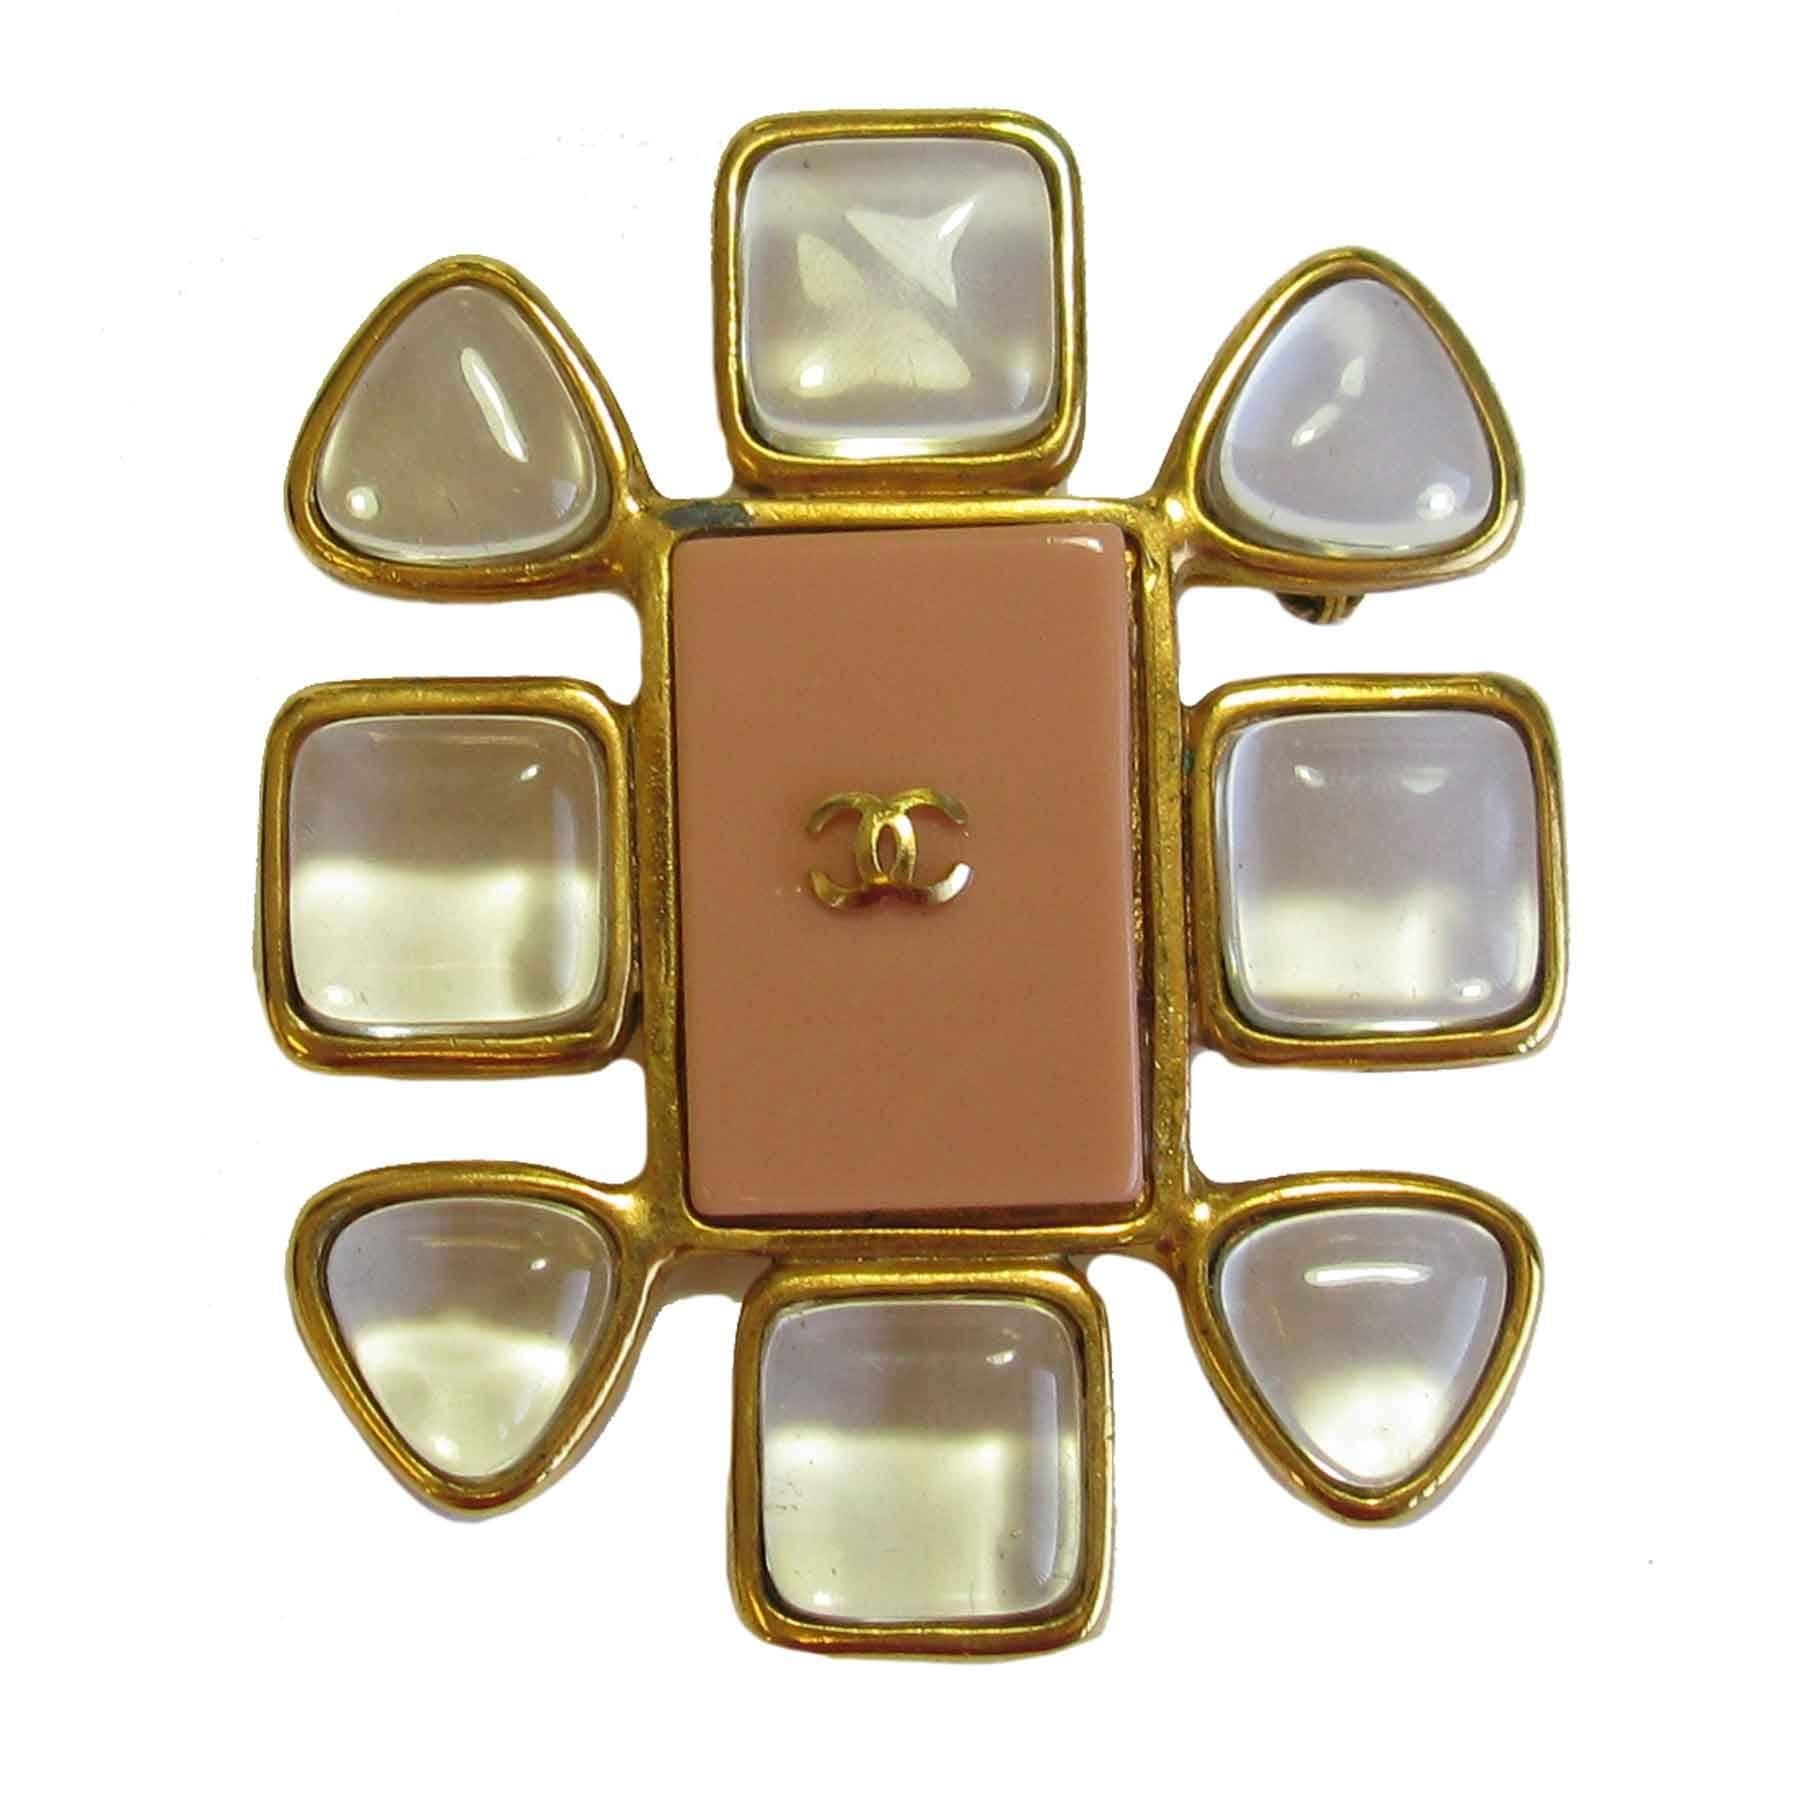 CHANEL Brooch in Gilt Metal, Transparent Molten Glass and Salmon Colored Resin